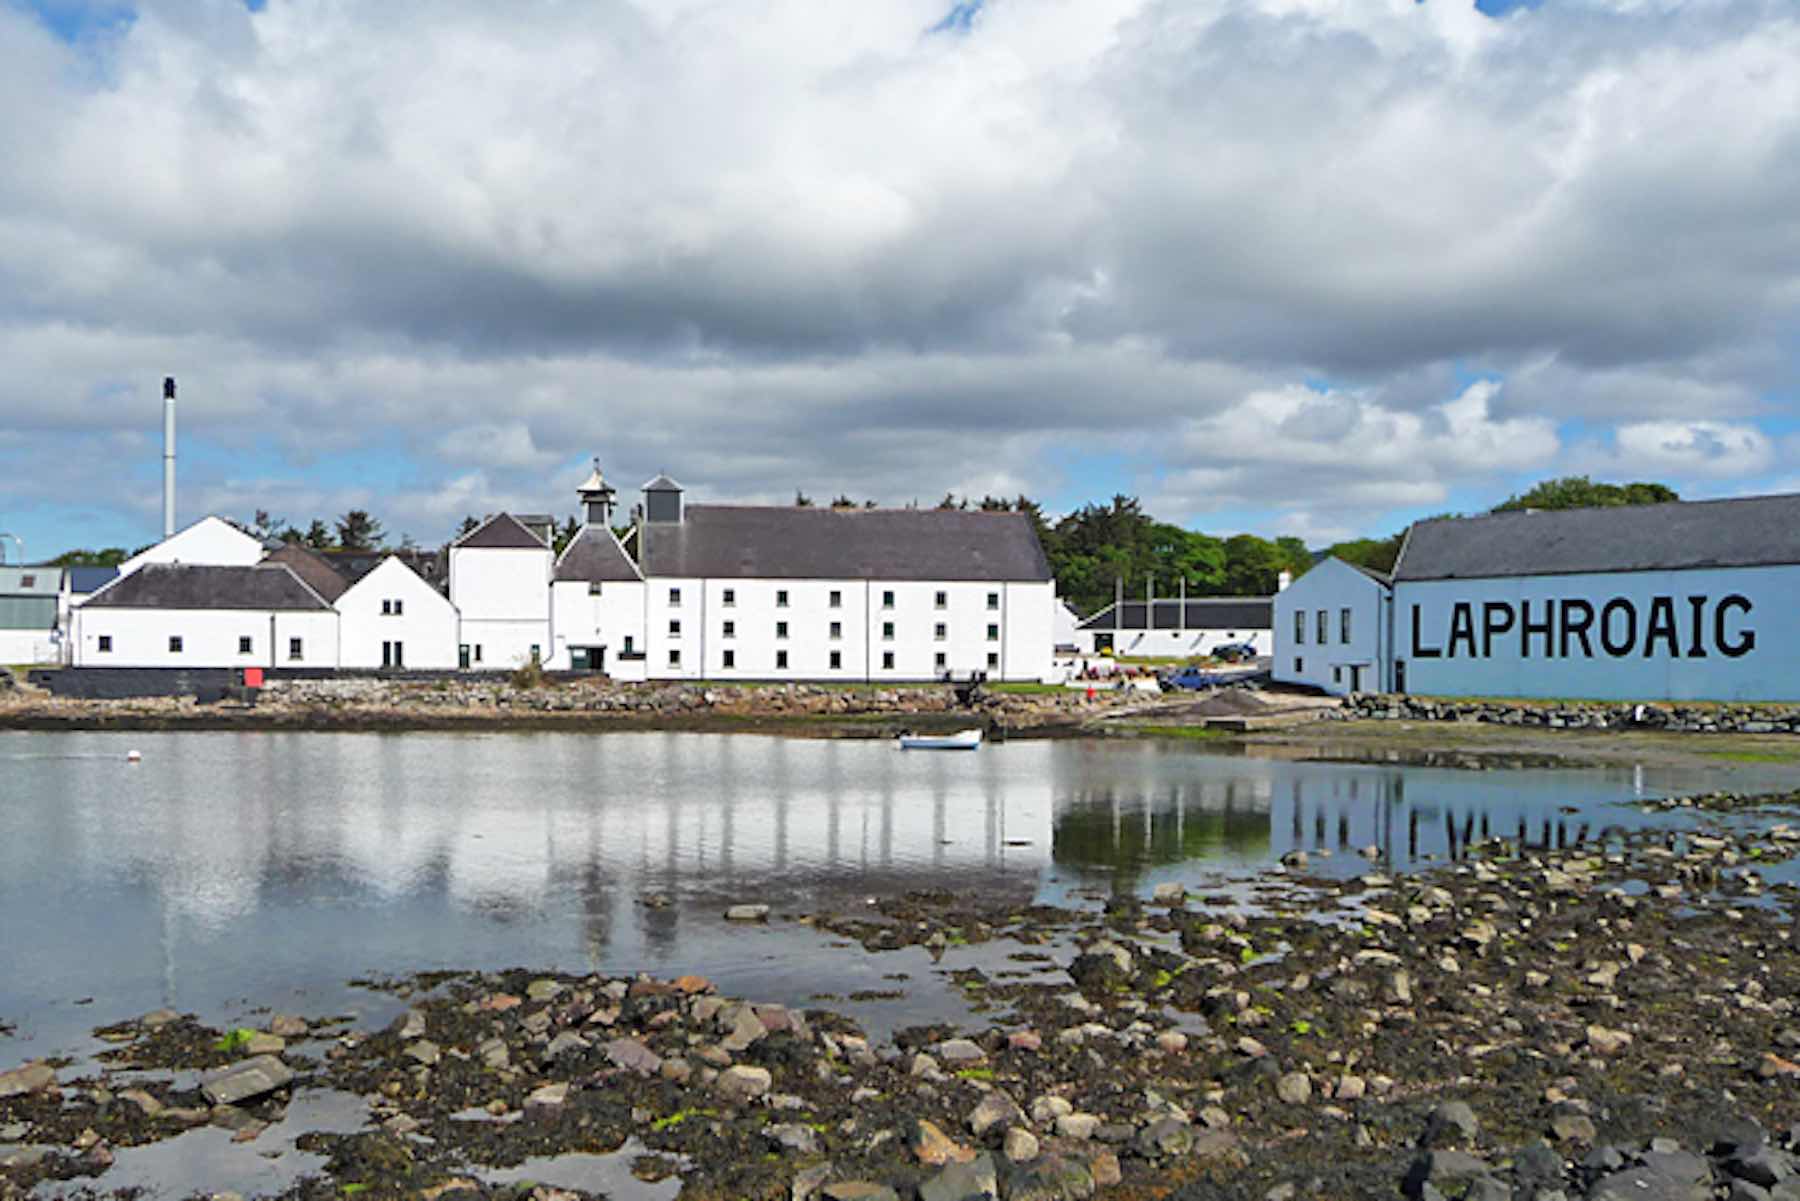 Laphroaig Distillery: Delving into the World of Islay's Peaty Pioneers